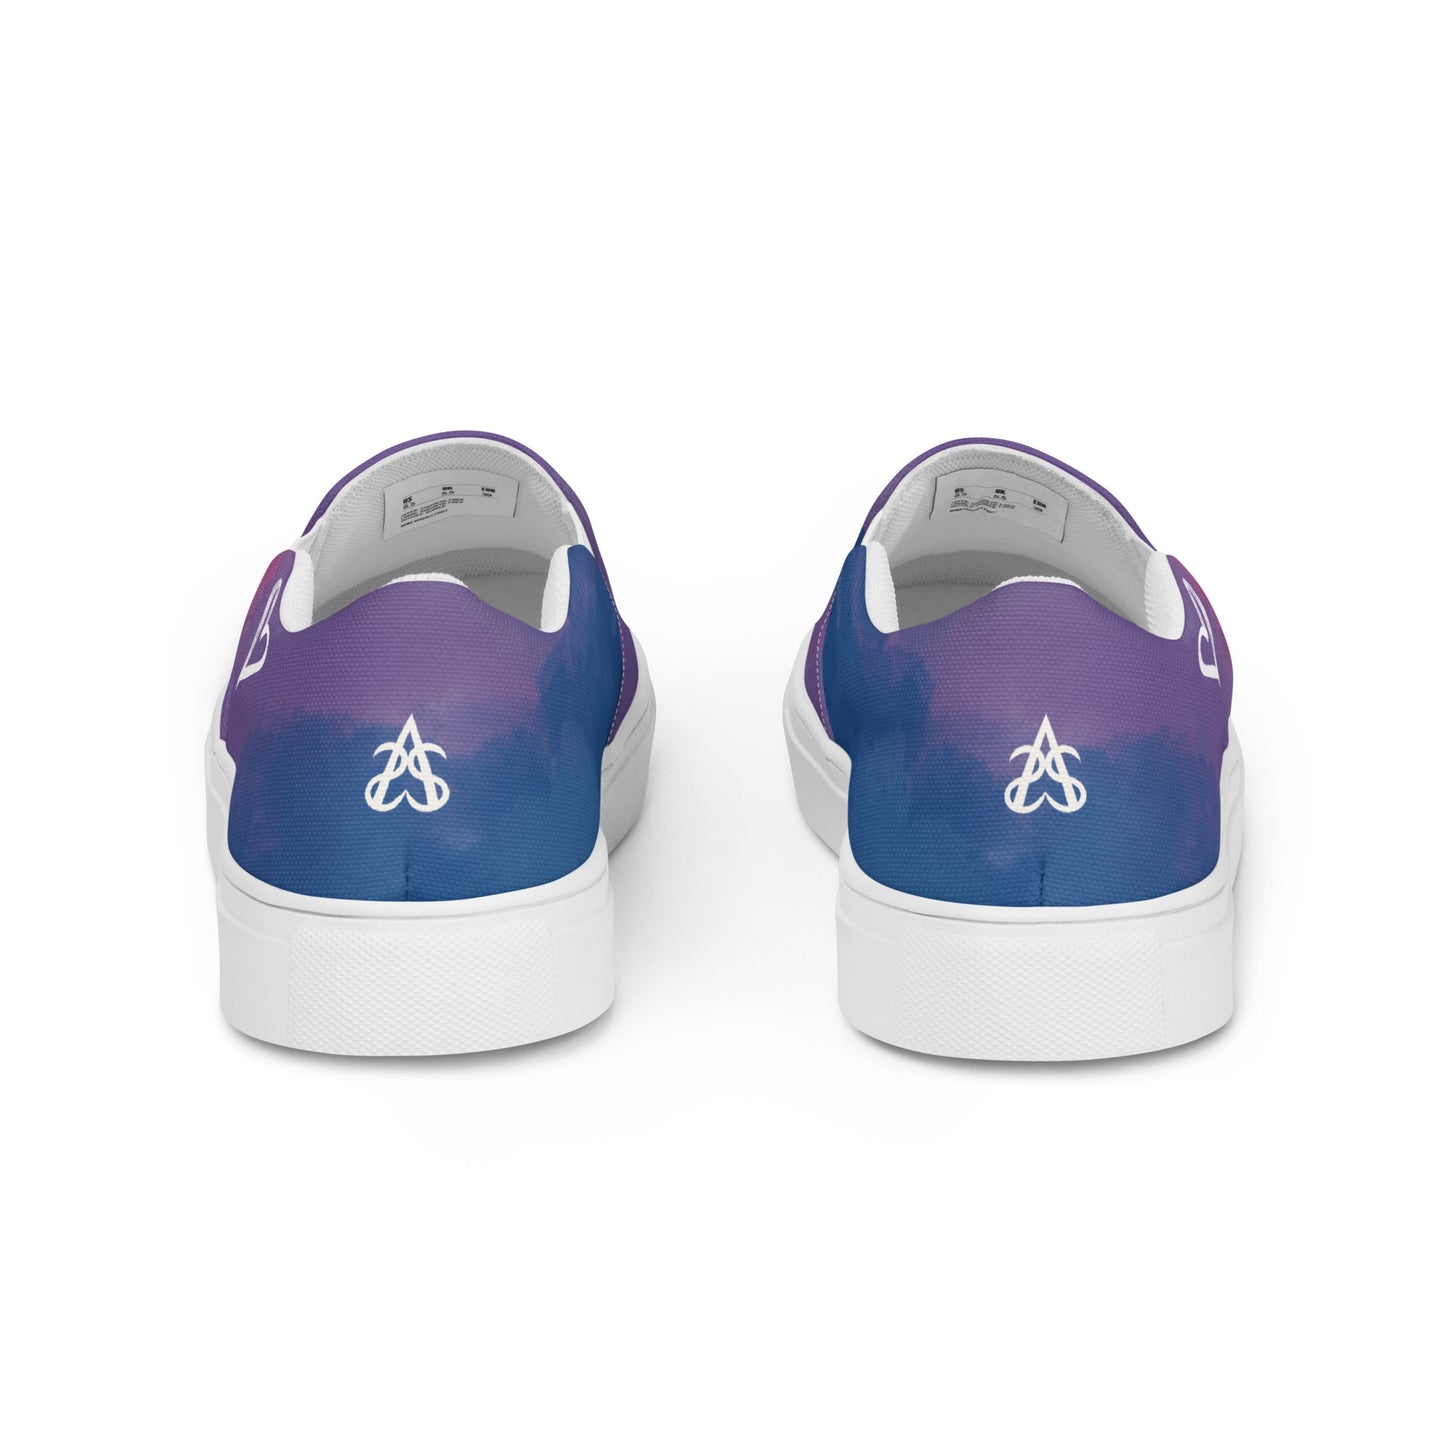 Back view: A pair of slip on shoes with color block pink, purple, and blue clouds, a white hand drawn heart, and the Aras Sivad logo on the back.